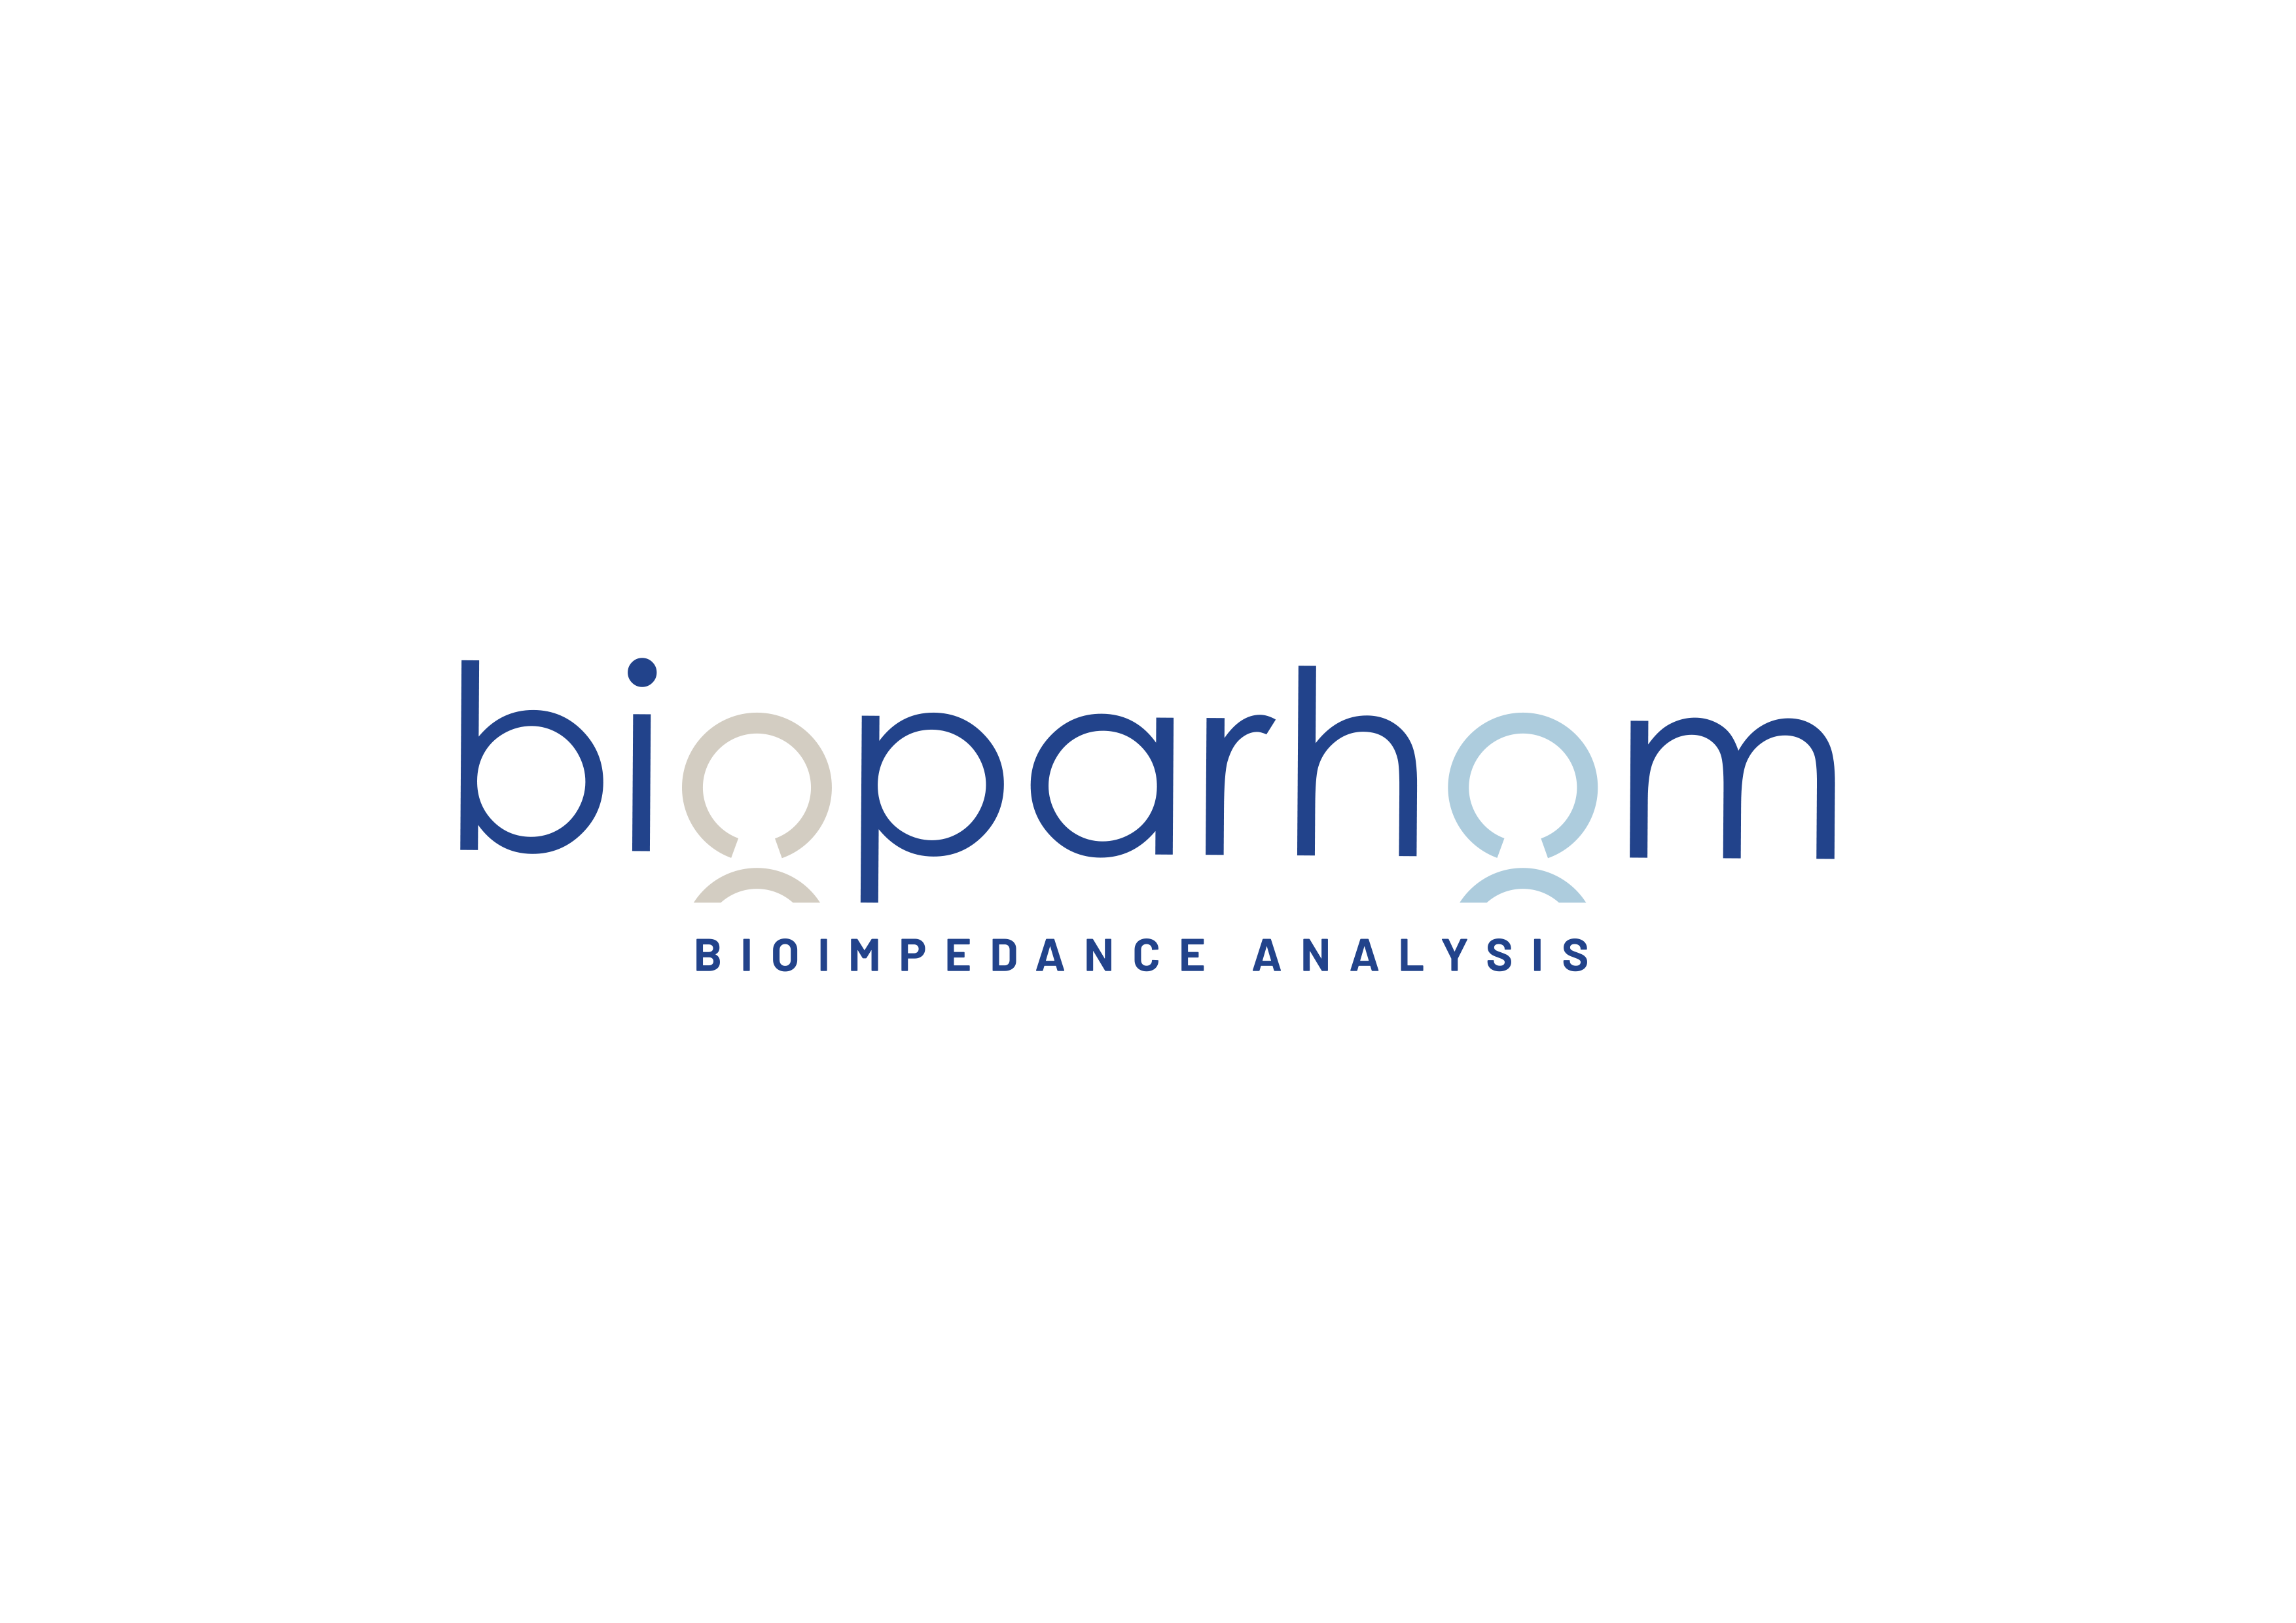 Web: www.bioparhom.com At the cutting edge of research in the field of bioimpedance, BioparHom designs, produces and markets medical equipment for analyzing body composition. Our goal is to provide health, nutrition and sports professionals, with researchers and vets, with measurement and diagnostic support tools that are as reliable as possible in terms of body composition. Constantly searching for innovations and refining the use of impedance measurement, we primarily target the healthcare and nutrition markets. The quality of our products is now well established in these markets and we are continuing our research to improve our equipment and provide more and more support for users.